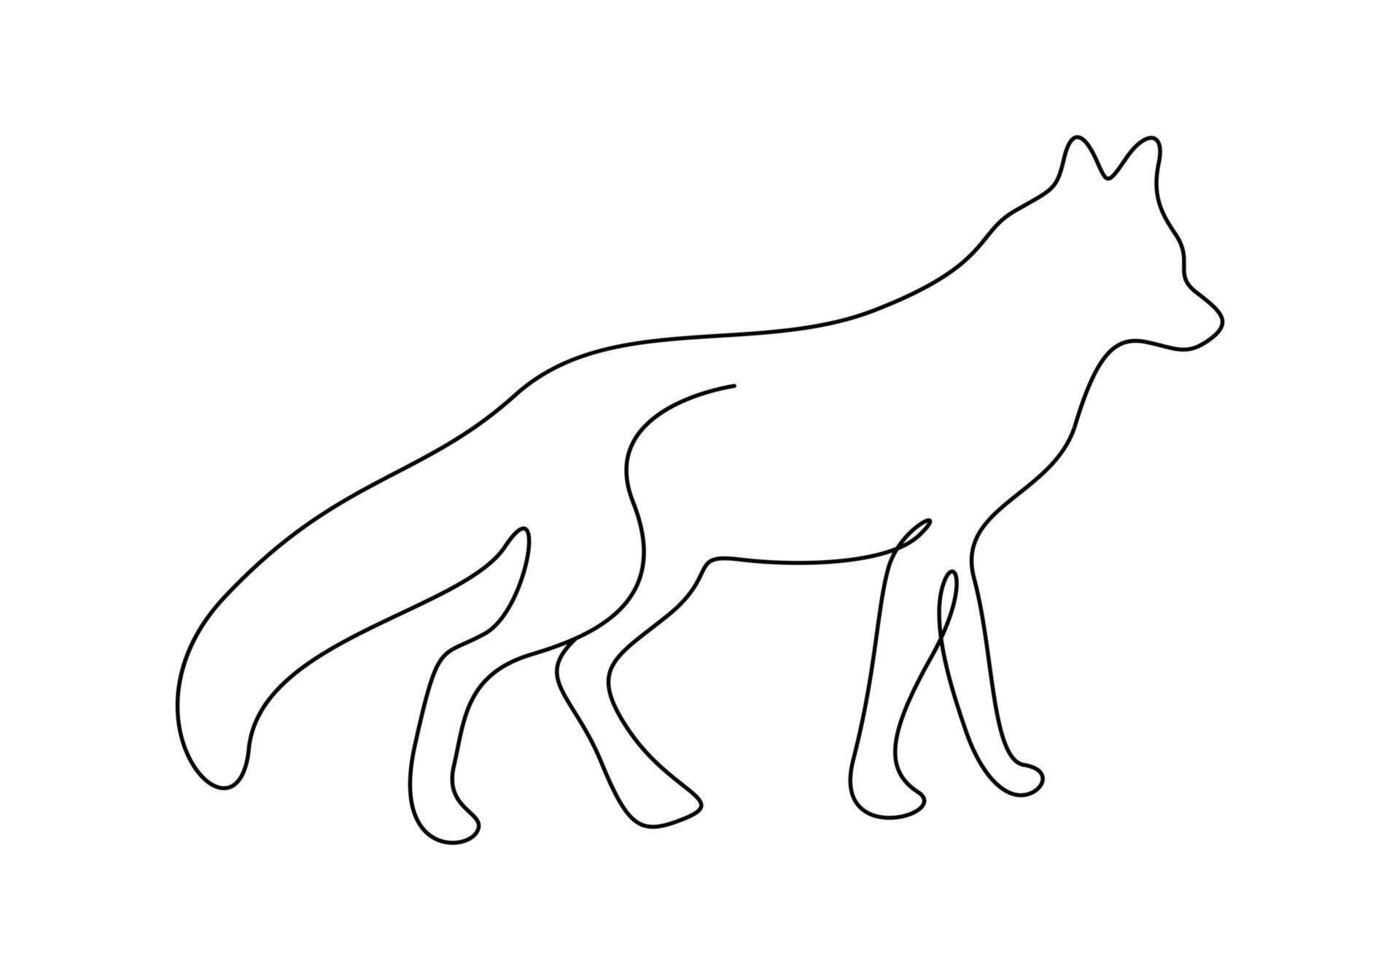 Wolf in one continuous line drawing vector illustration